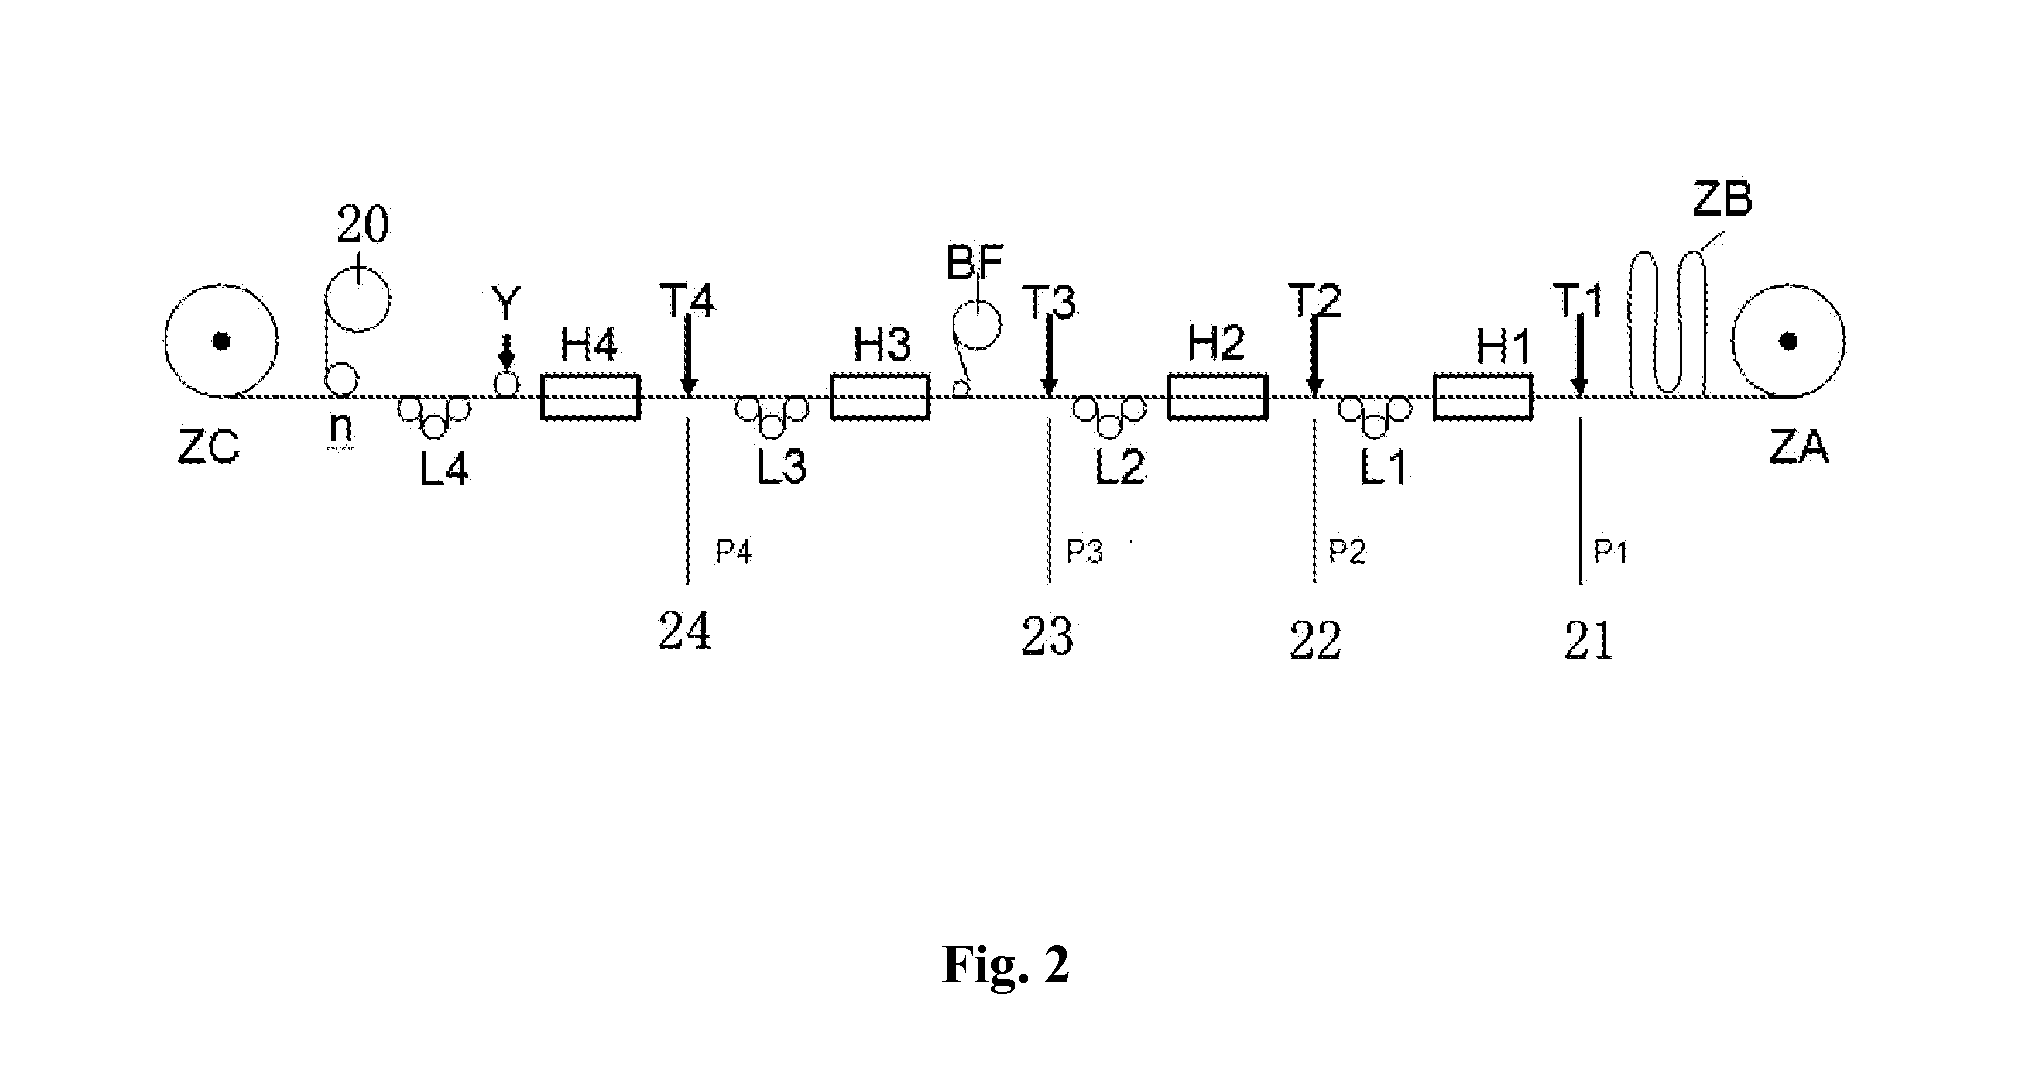 Multi-function soft wall and manufacturing method thereof